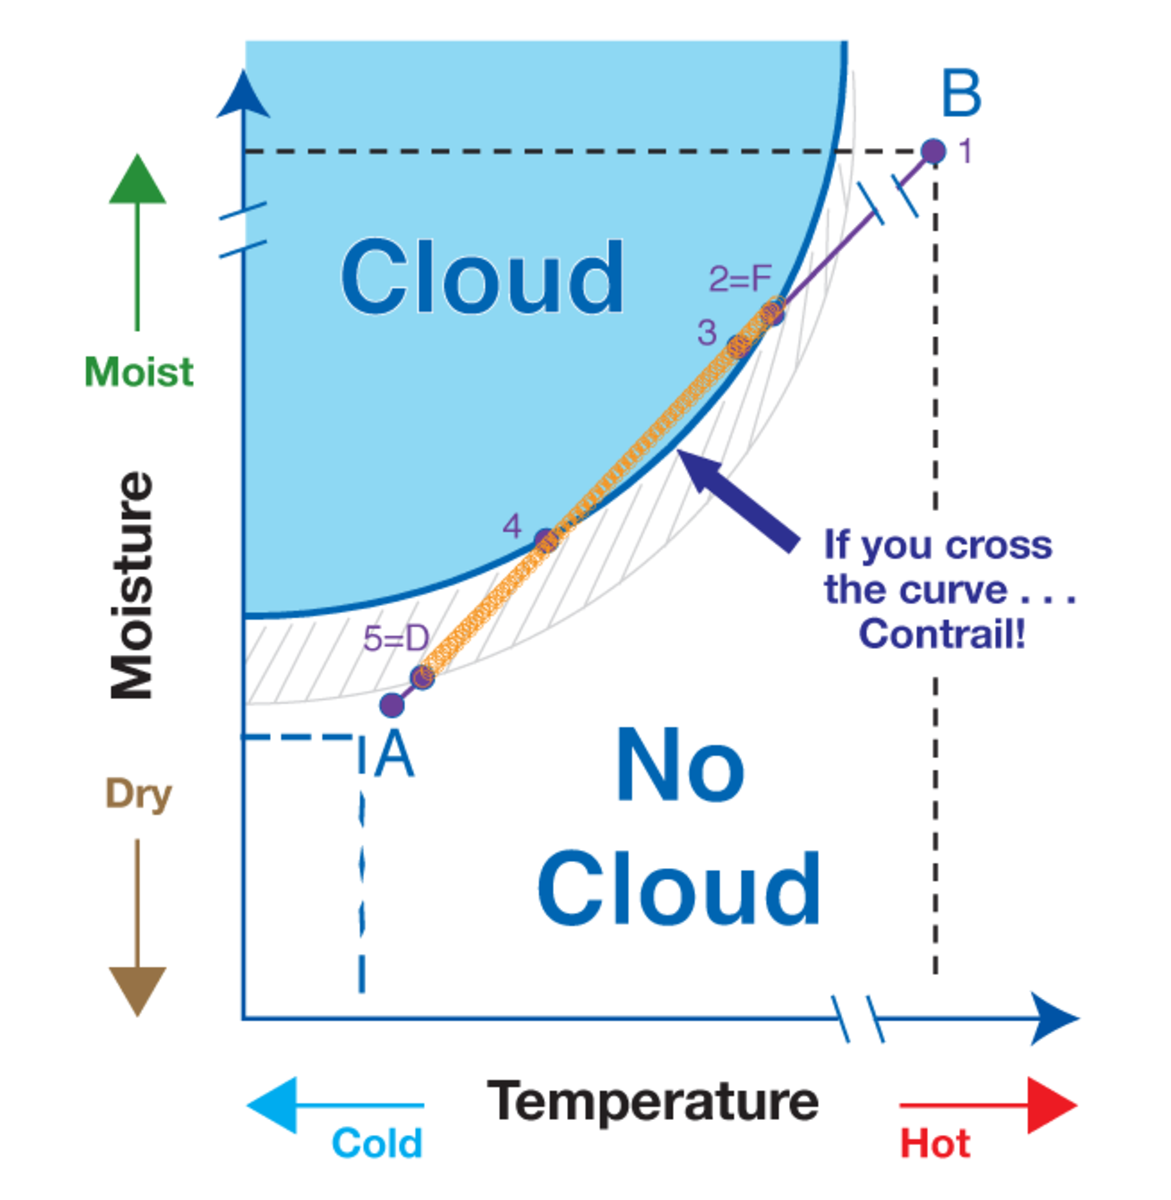 Contrail formation guide - when airplane exhaust B mixes with atmospheric conditions A, a contrail will form if the line between them crosses the condensation curve - the solid blue line.